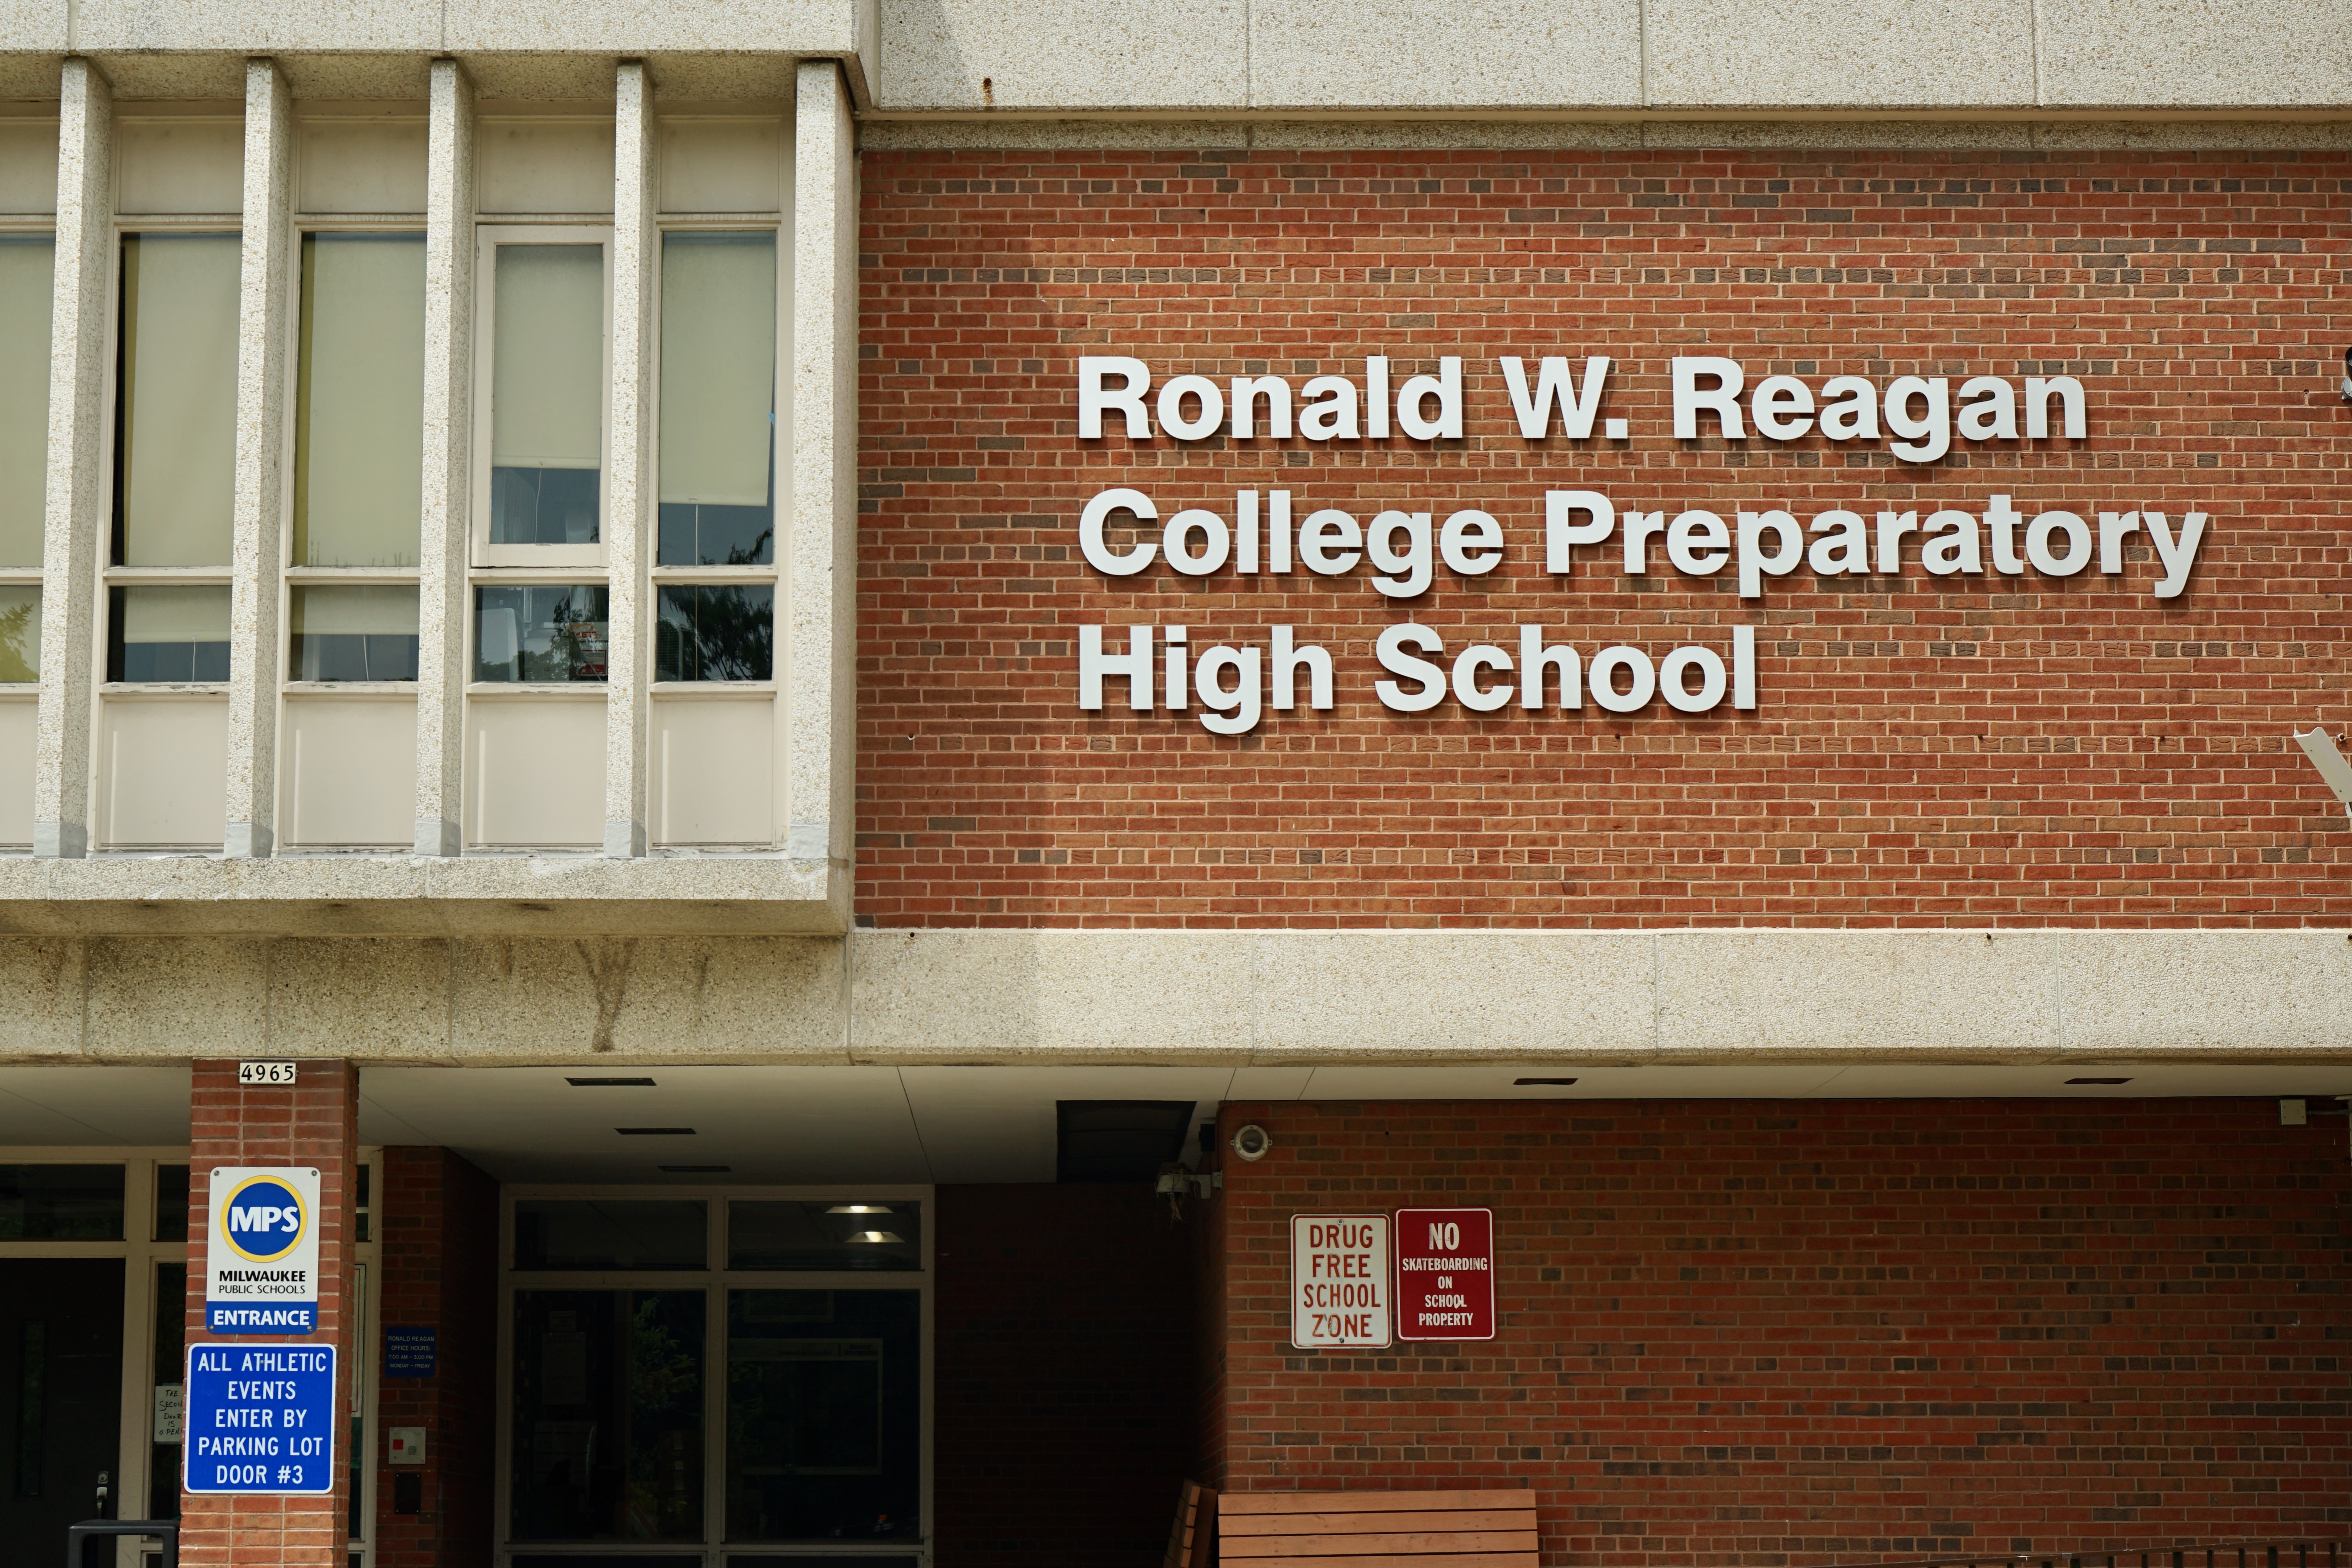 opinion-the-namesake-of-ronald-reagan-high-school-worked-to-deny-opportunity-to-students-like